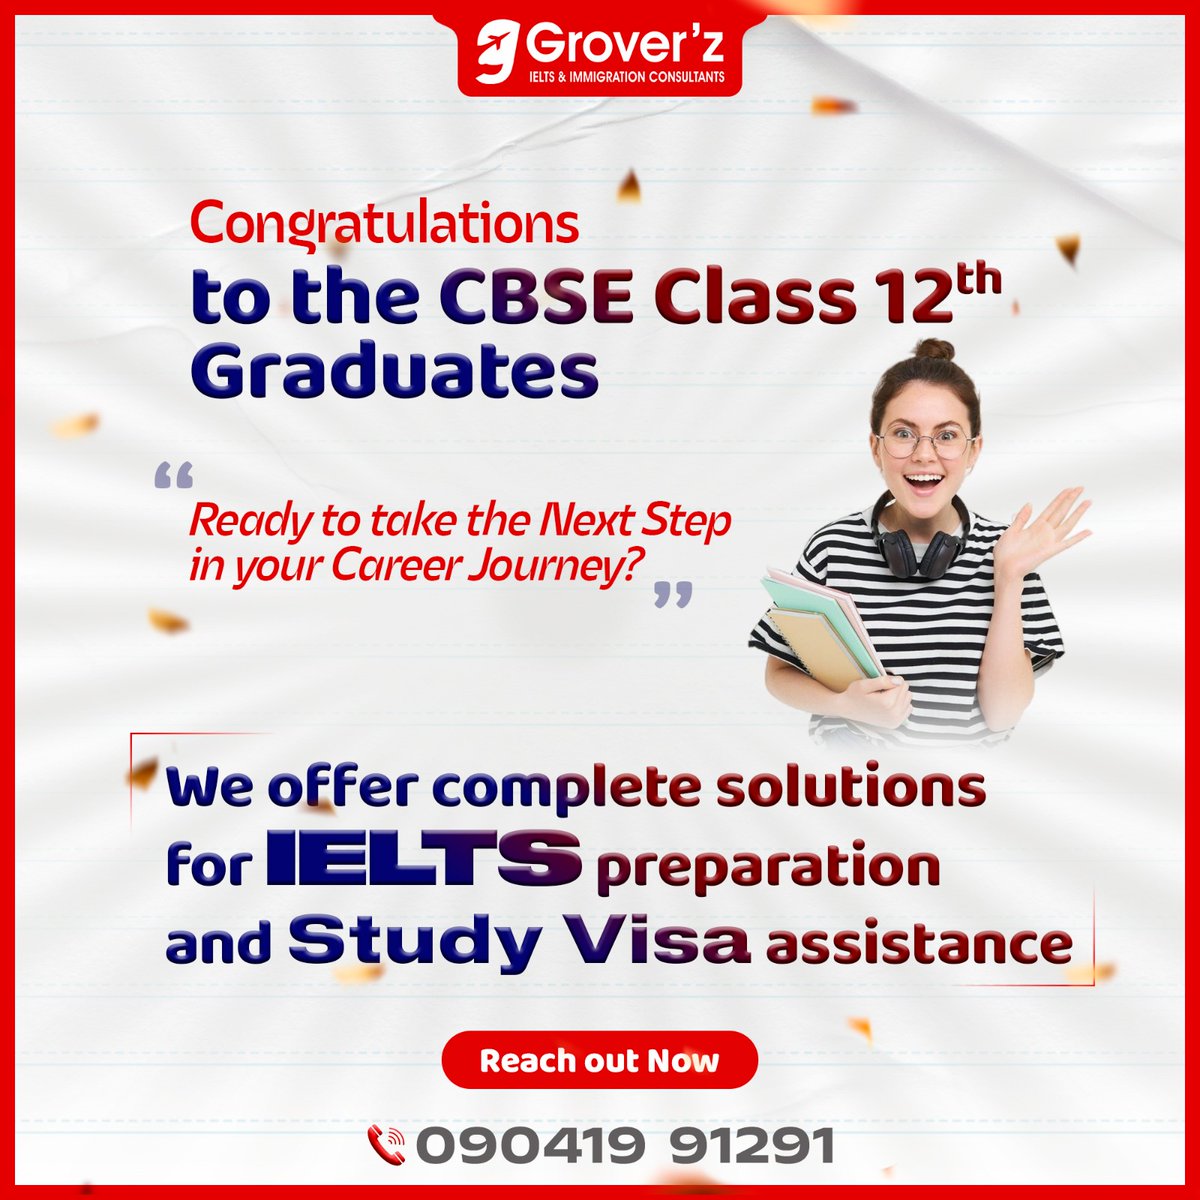 🎓 Kudos to all CBSE Class 12 graduates! Are you thinking about what comes next? 🌟 We're here to help you prepare for IELTS and assist with your study visa. Take the next big step in your career journey with us—get in touch today! . #GroverzIeltsImmigration #CBSEResults